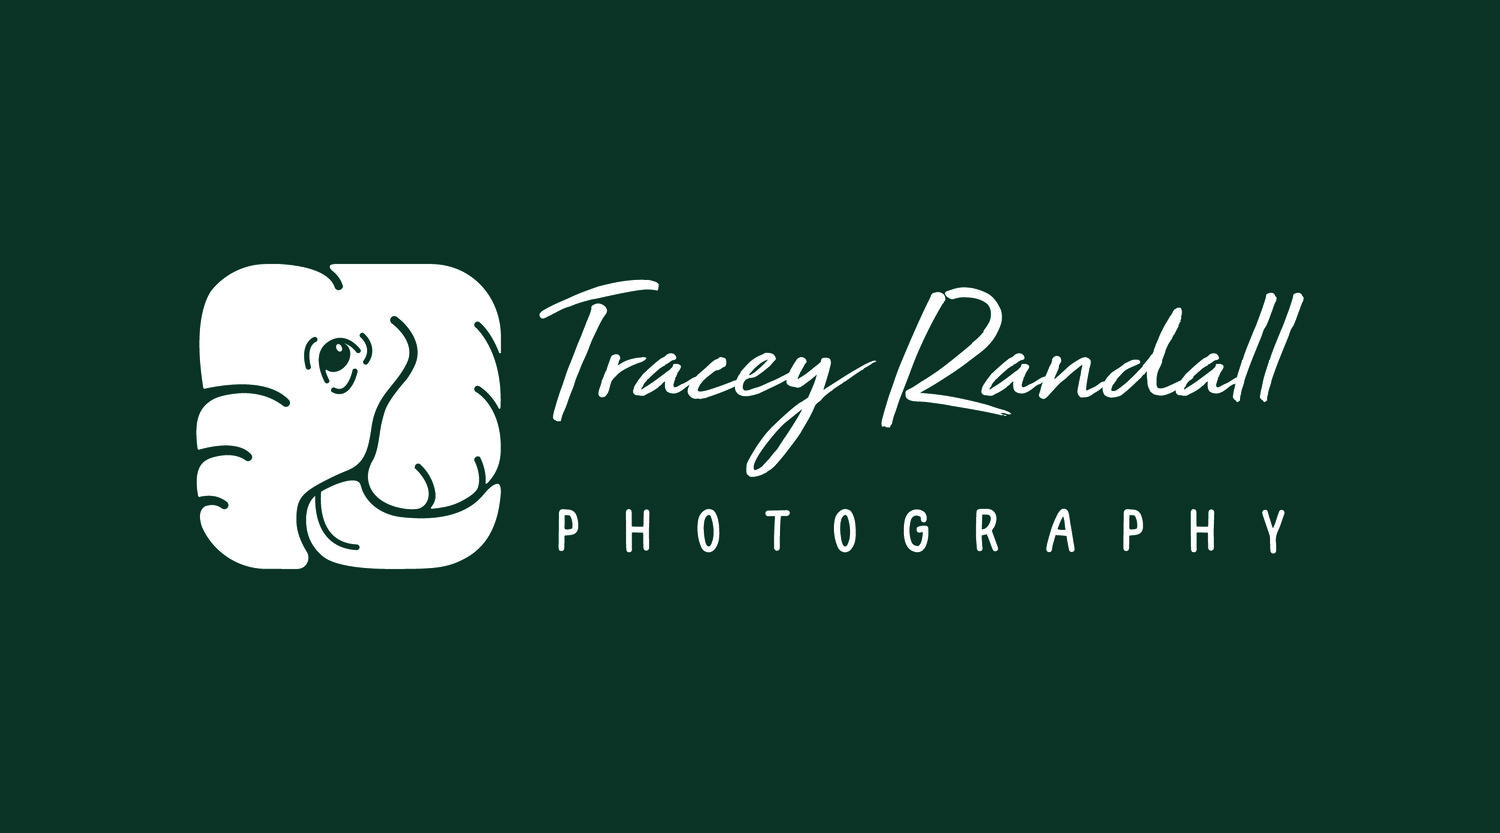 Tracey Randall Photography